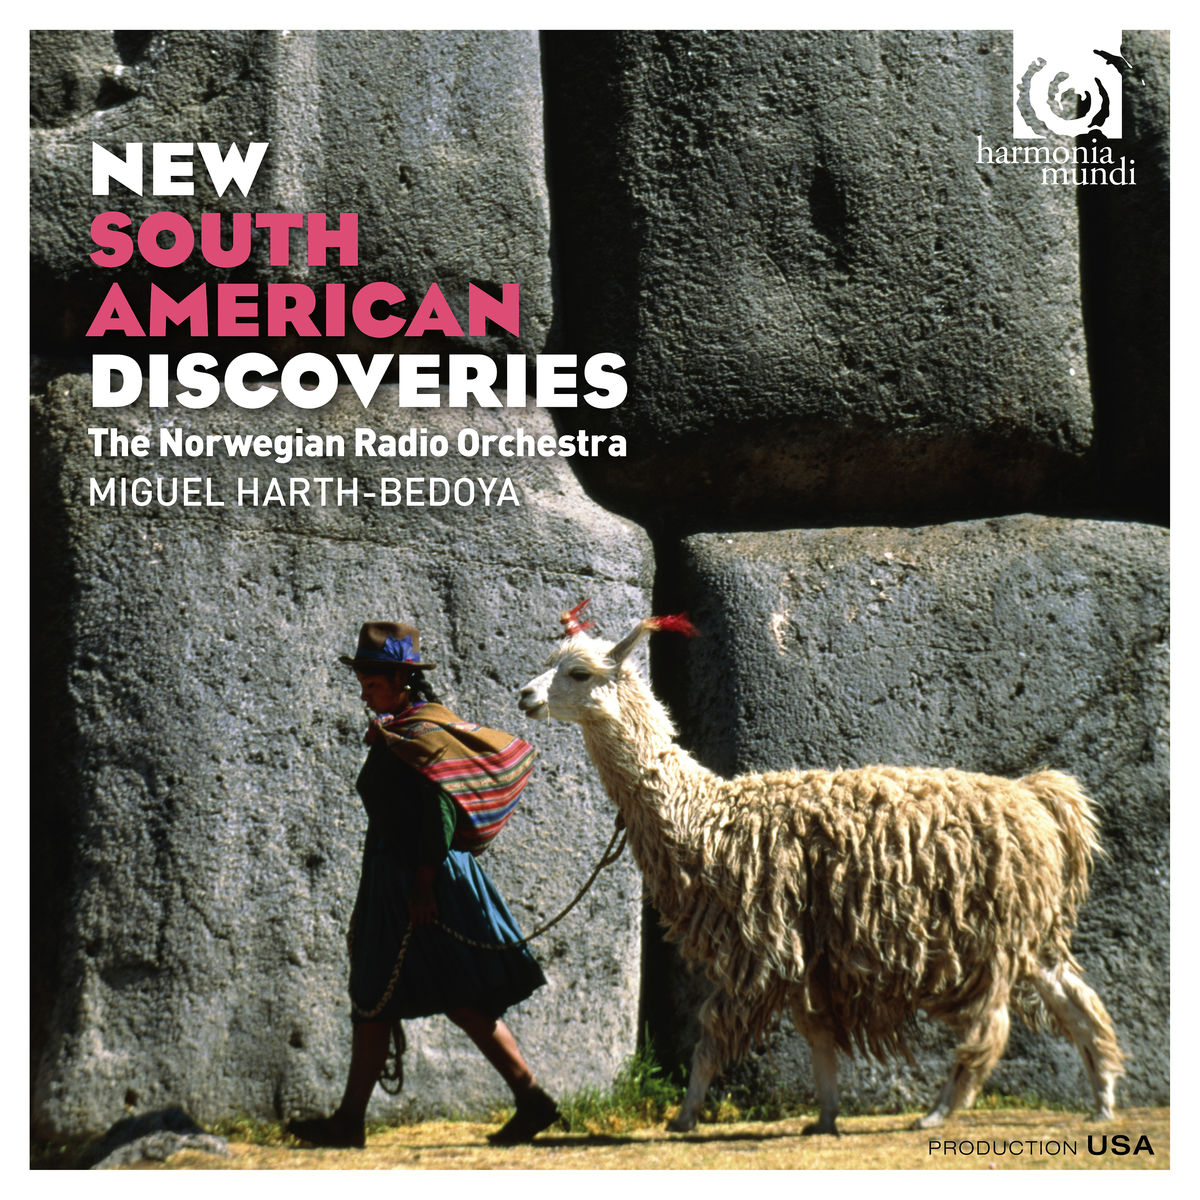 Miguel Harth-Bedoya & The Norwegian Radio Orchestra - New South American Discoveries (2016) [Qobuz FLAC 24bit/48kHz]